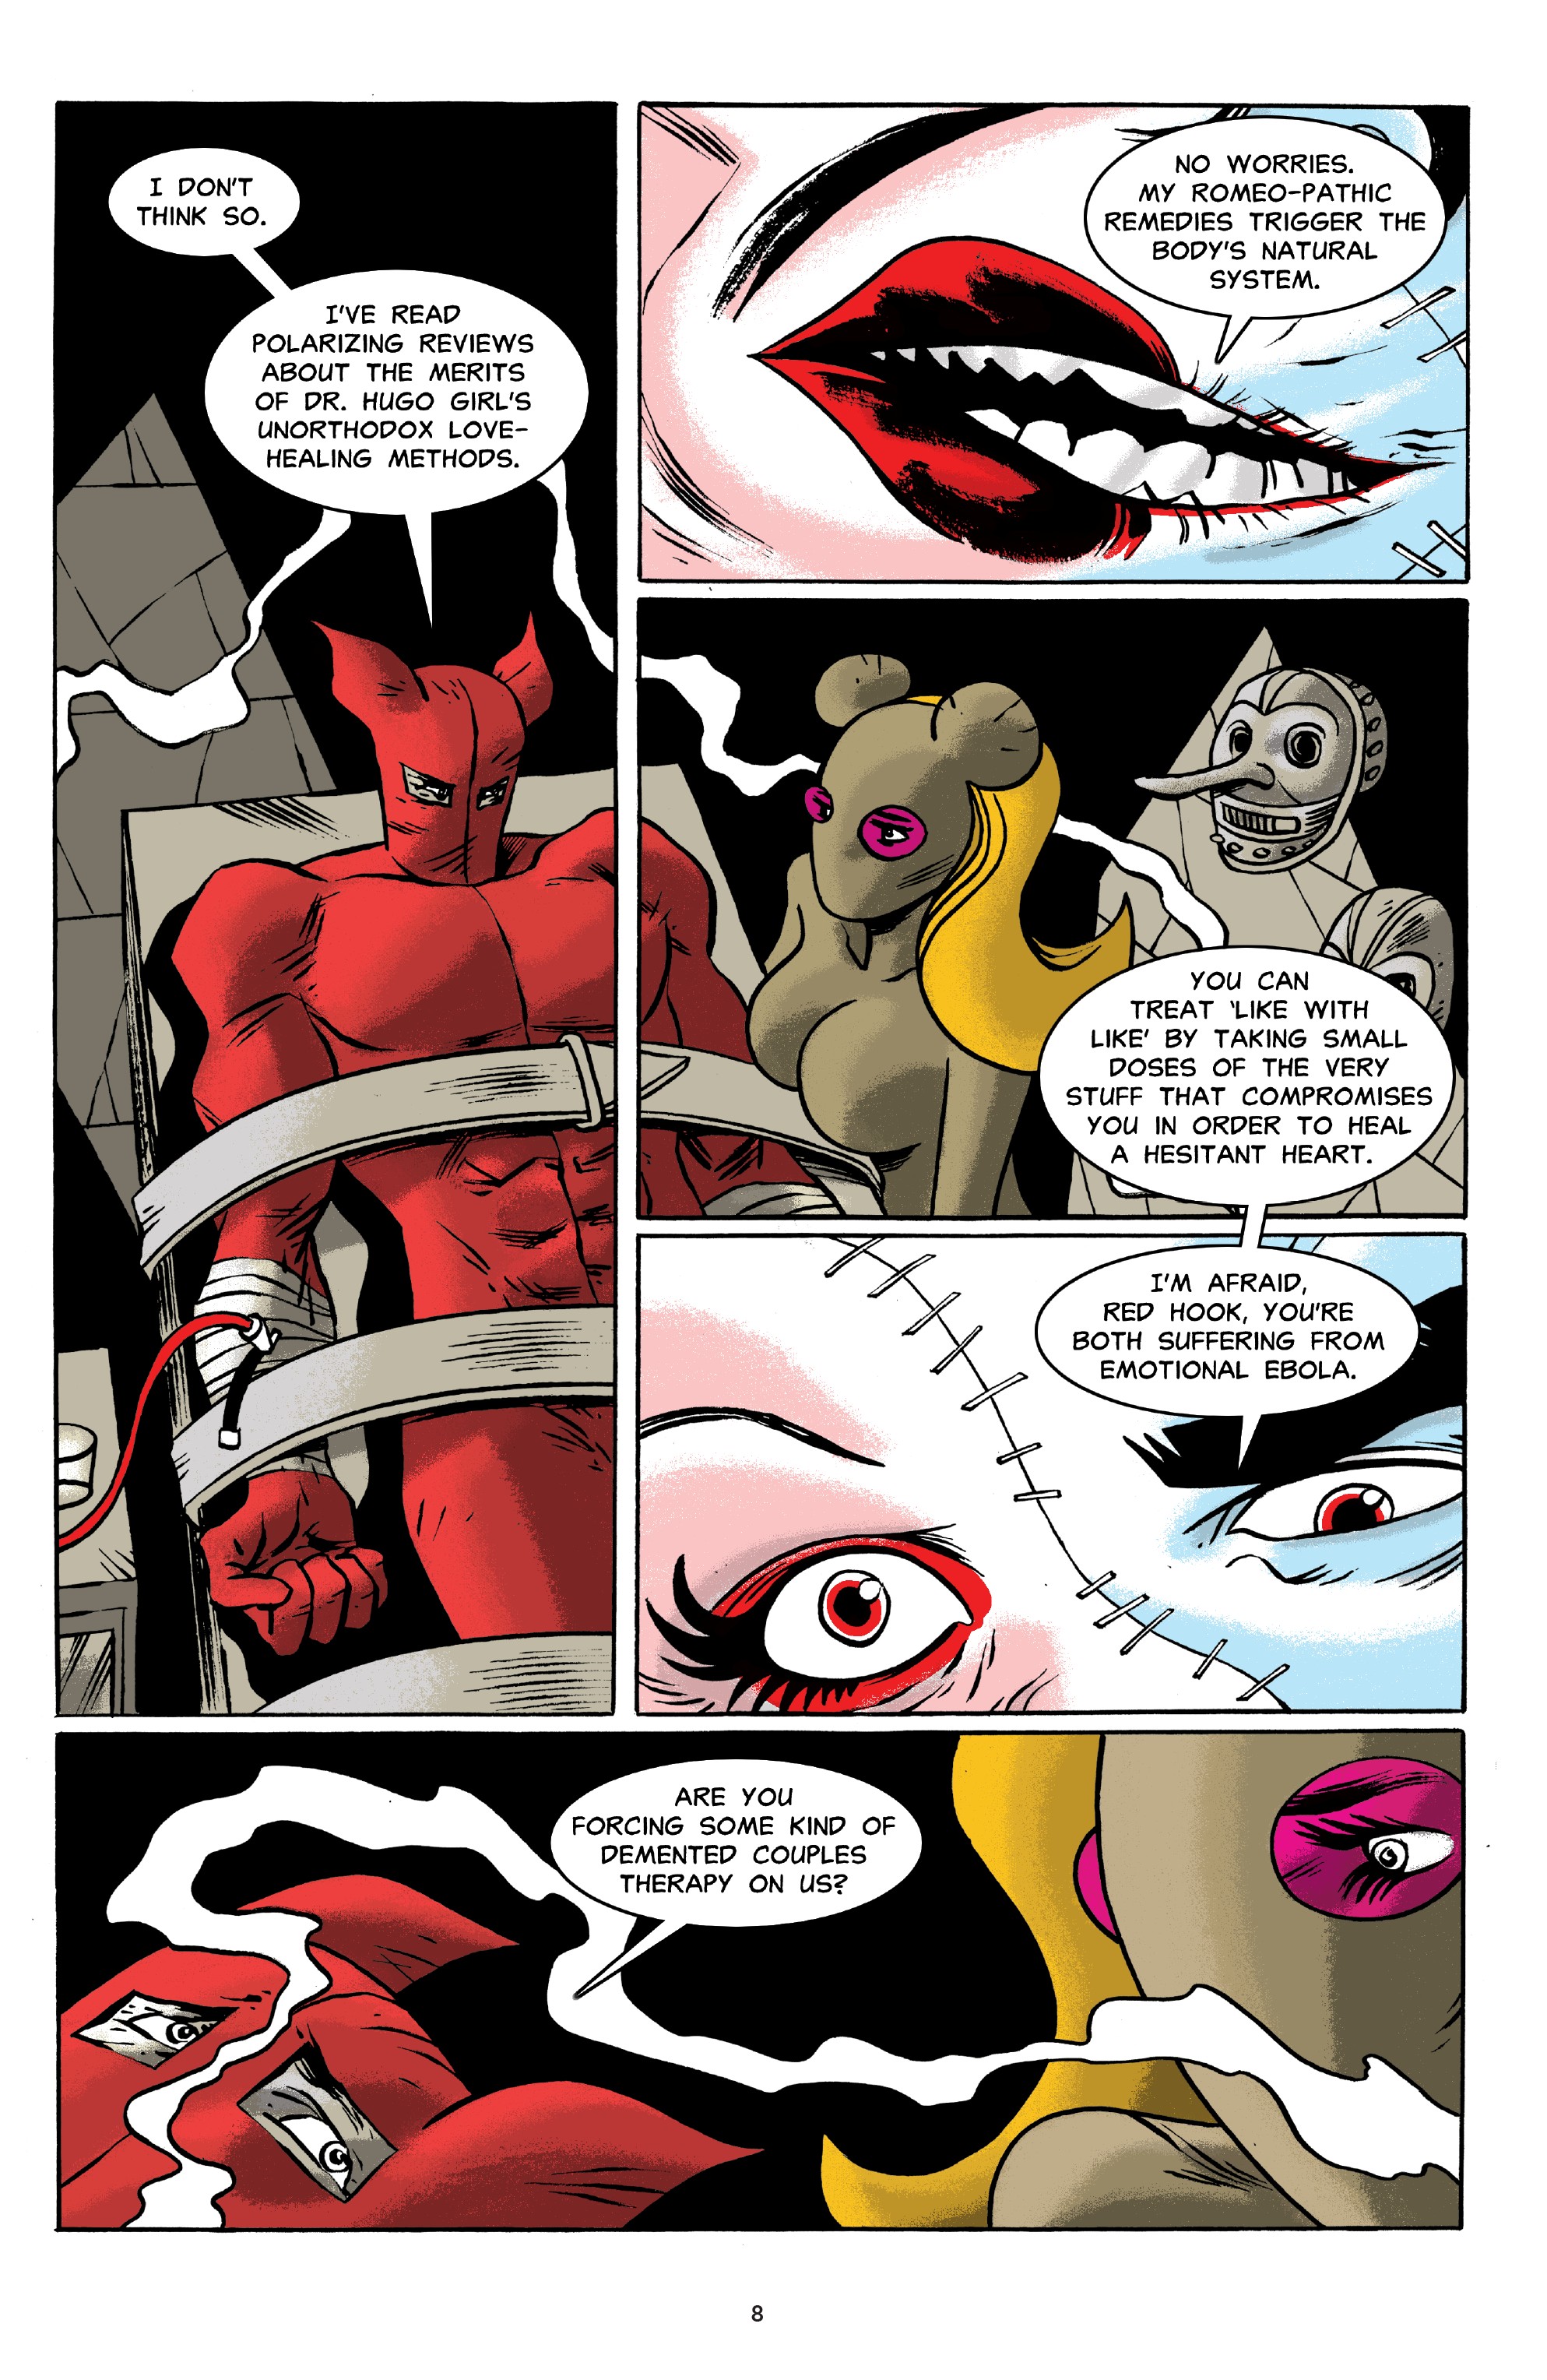 Read online The Red Hook comic -  Issue # TPB (Part 1) - 9